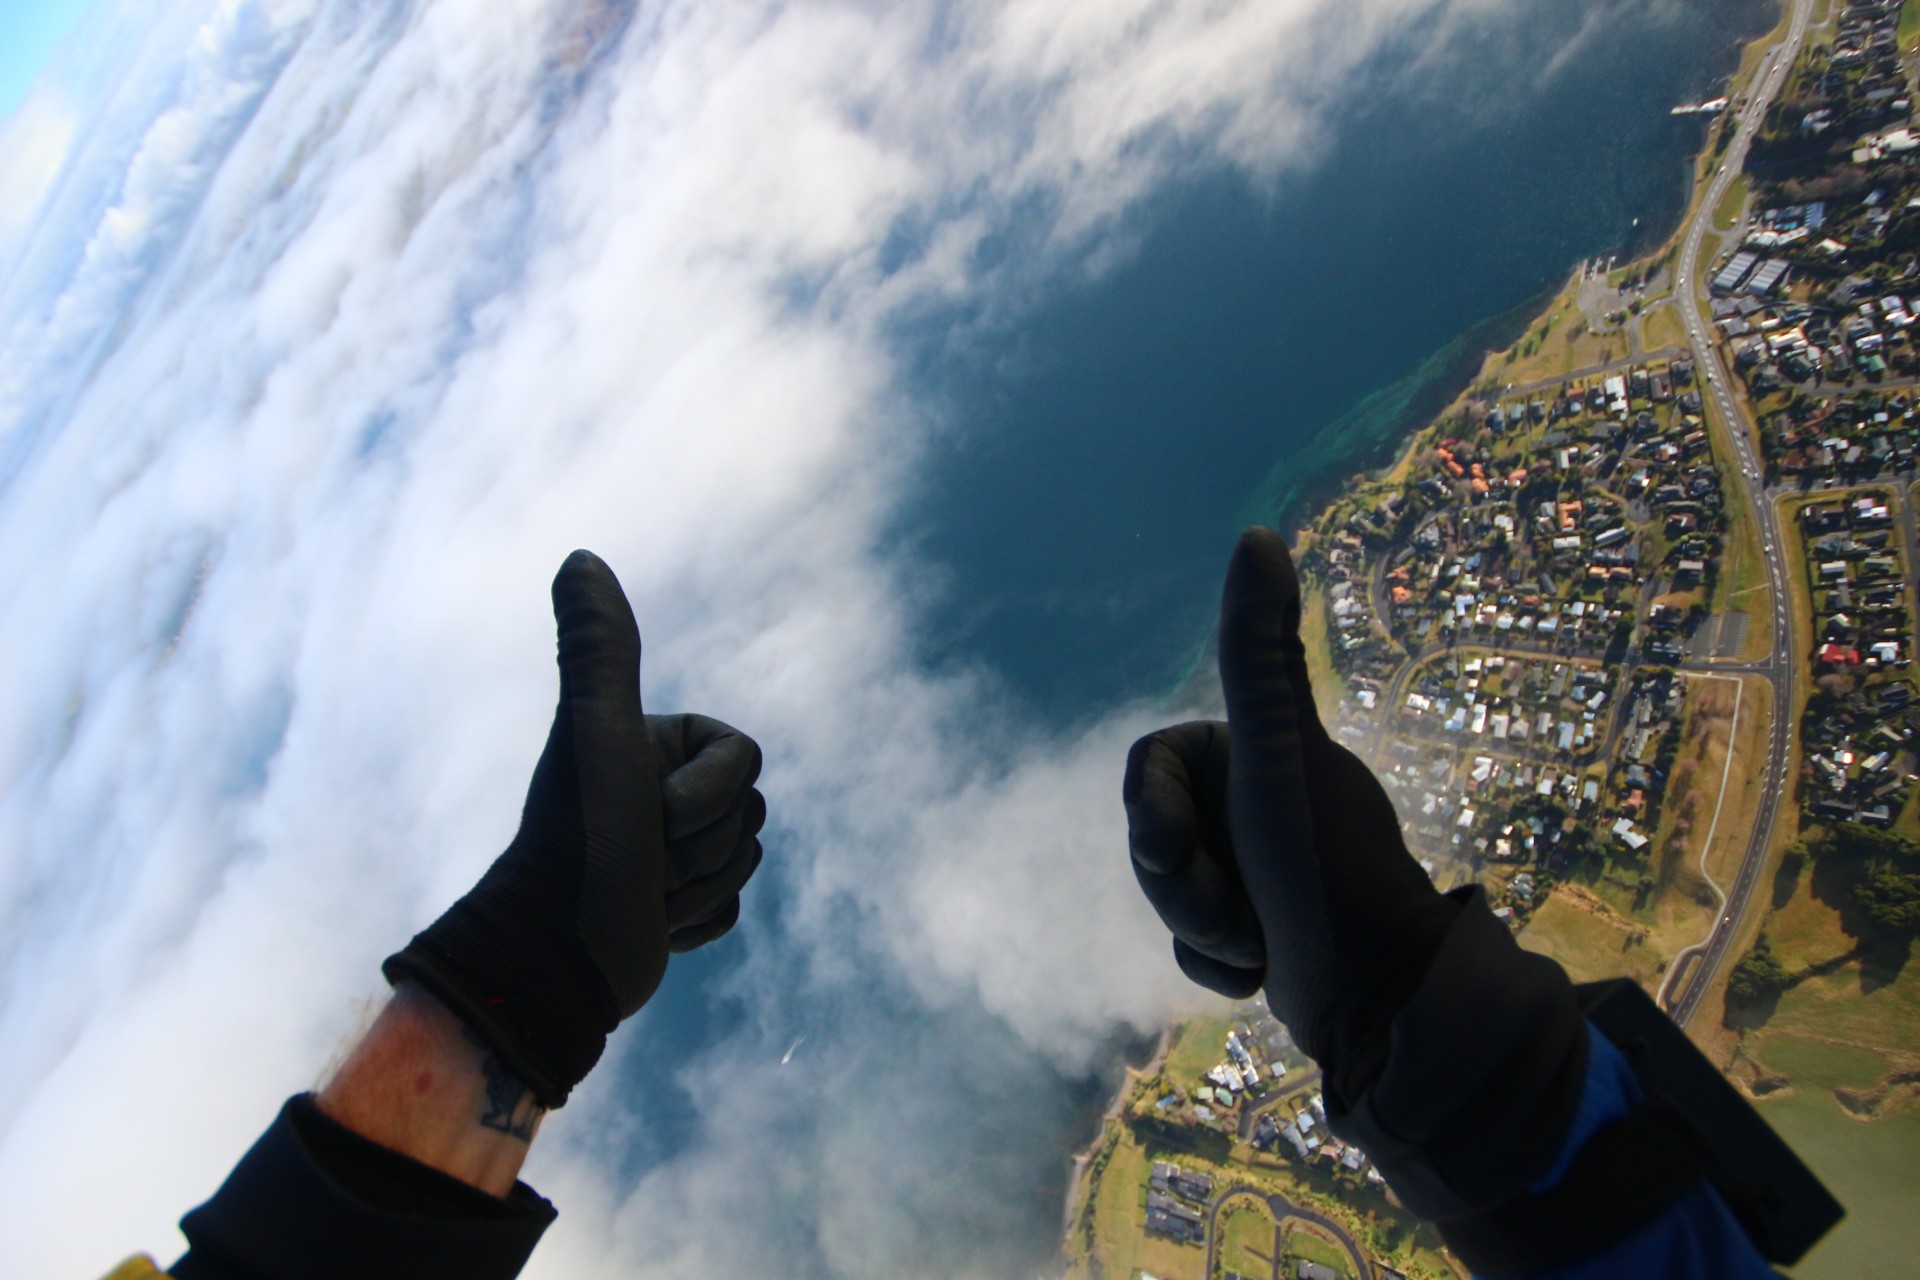 Thumbs up with gloves town below green fields blue lake clouds Skydive Taupo The Best Skydiving in New Zealand